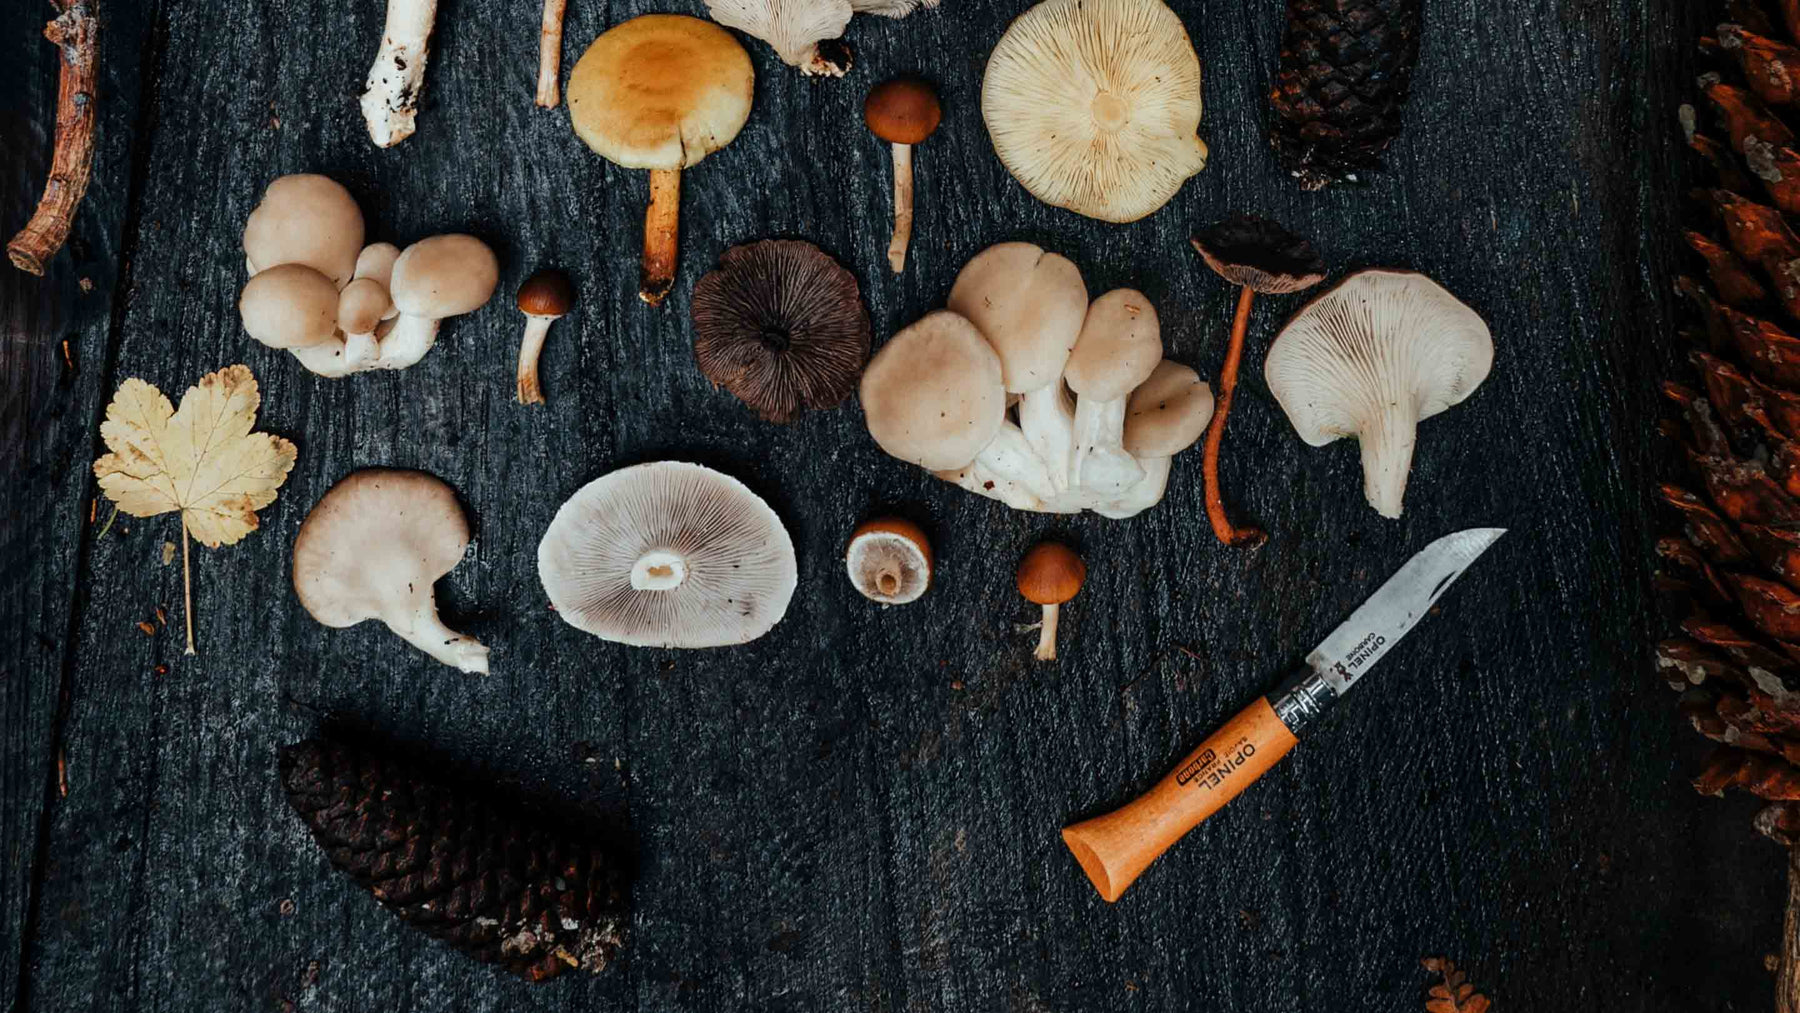 FORAGED MUSHROOMS WITH KNIFE